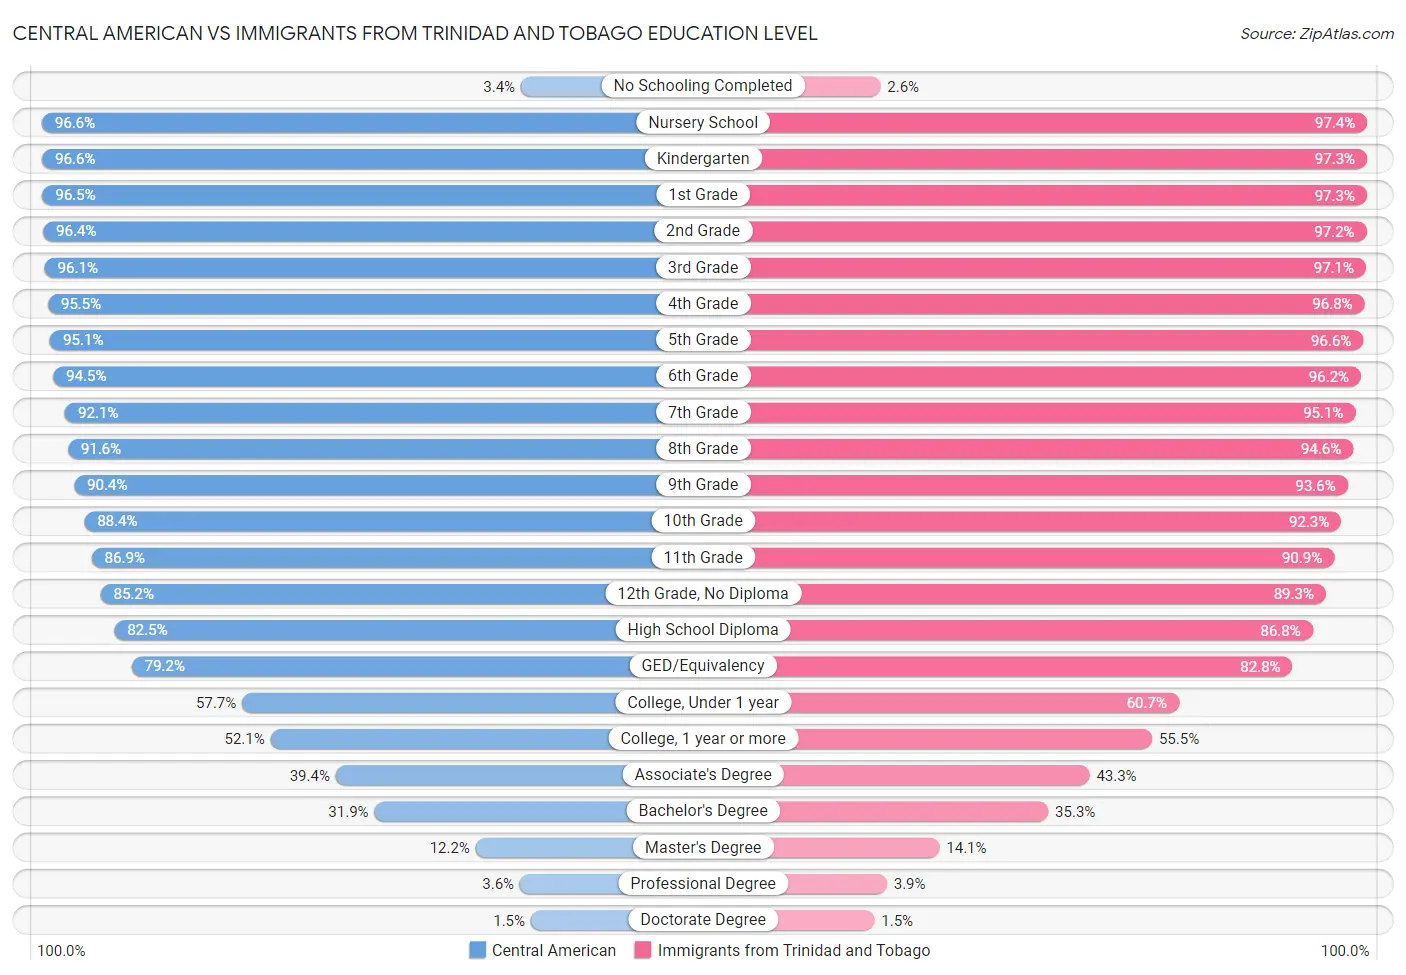 Central American vs Immigrants from Trinidad and Tobago Education Level